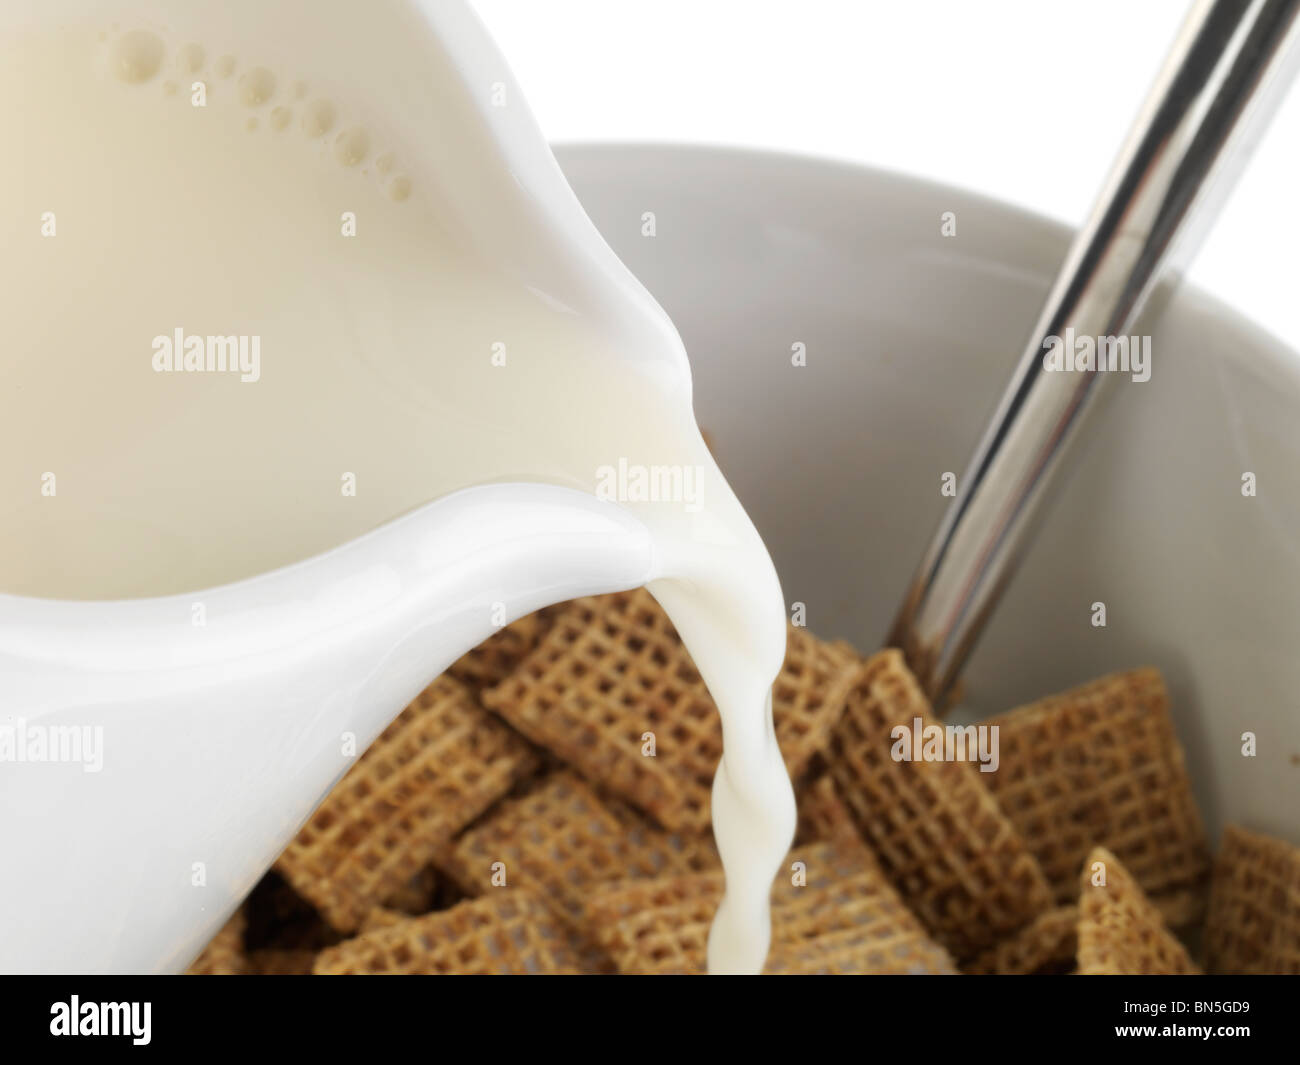 Pouring Milk onto Cereal Stock Photo